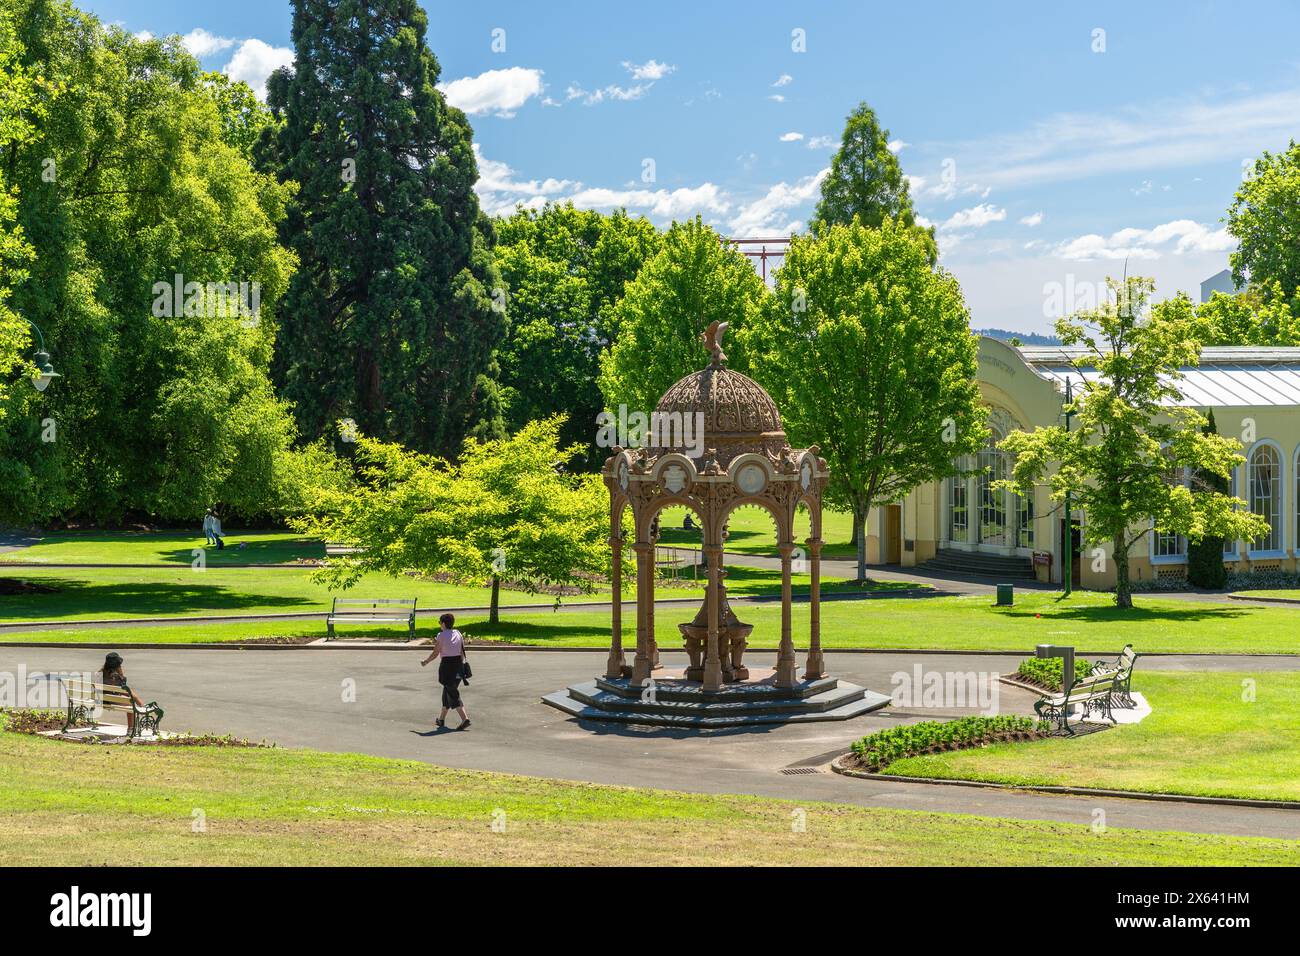 City Park is a large park in the centre of Launceston, Tasmania, Australia. The popular outdoor spot contains the historic cast-iron Jubilee Fountain. Stock Photo